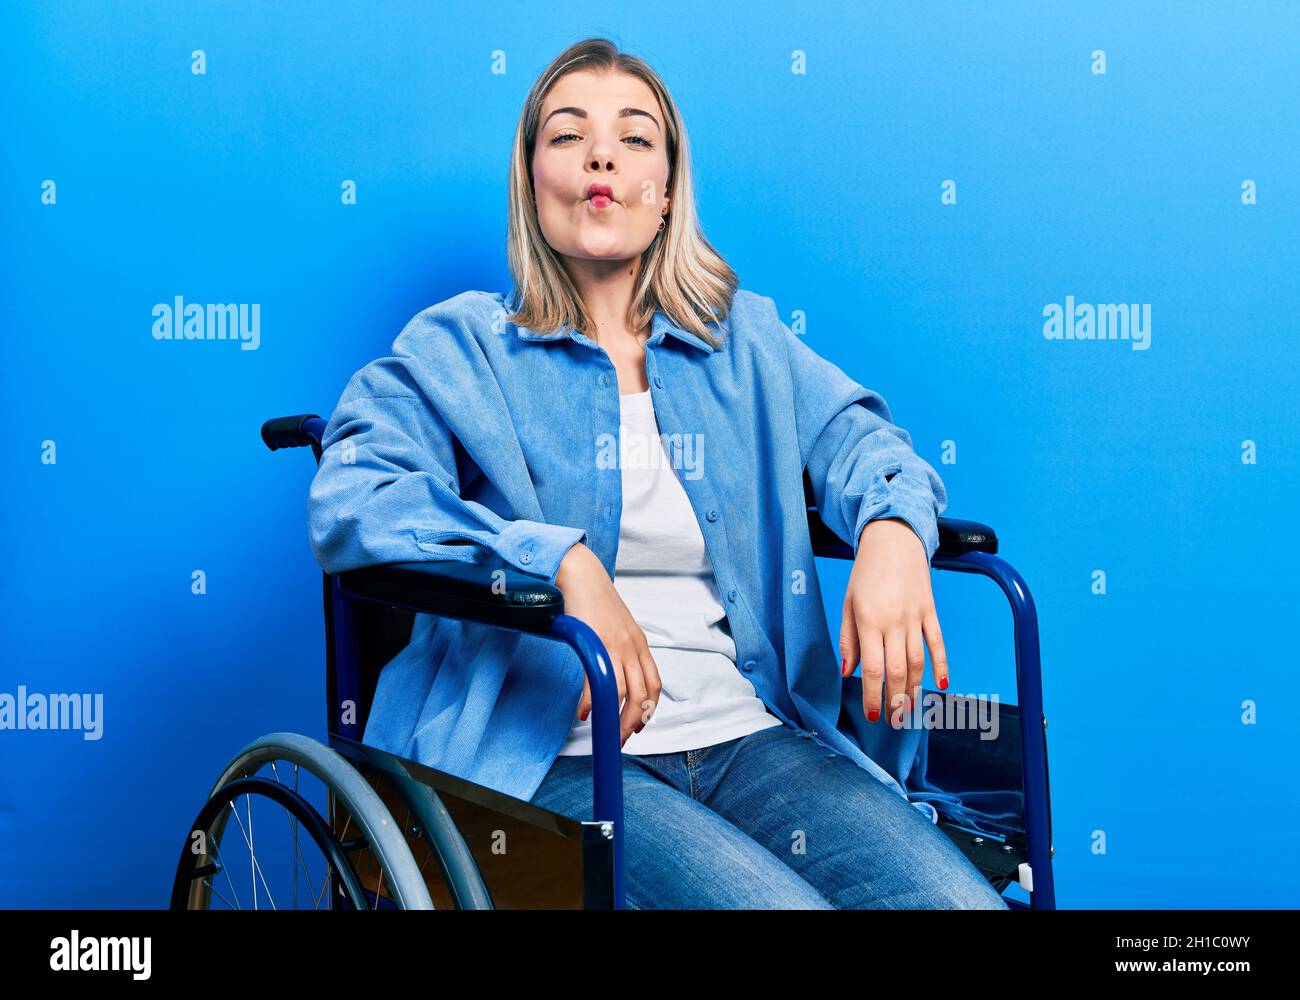 Beautiful caucasian woman sitting on wheelchair making fish face with lips,  crazy and comical gesture. funny expression Stock Photo - Alamy